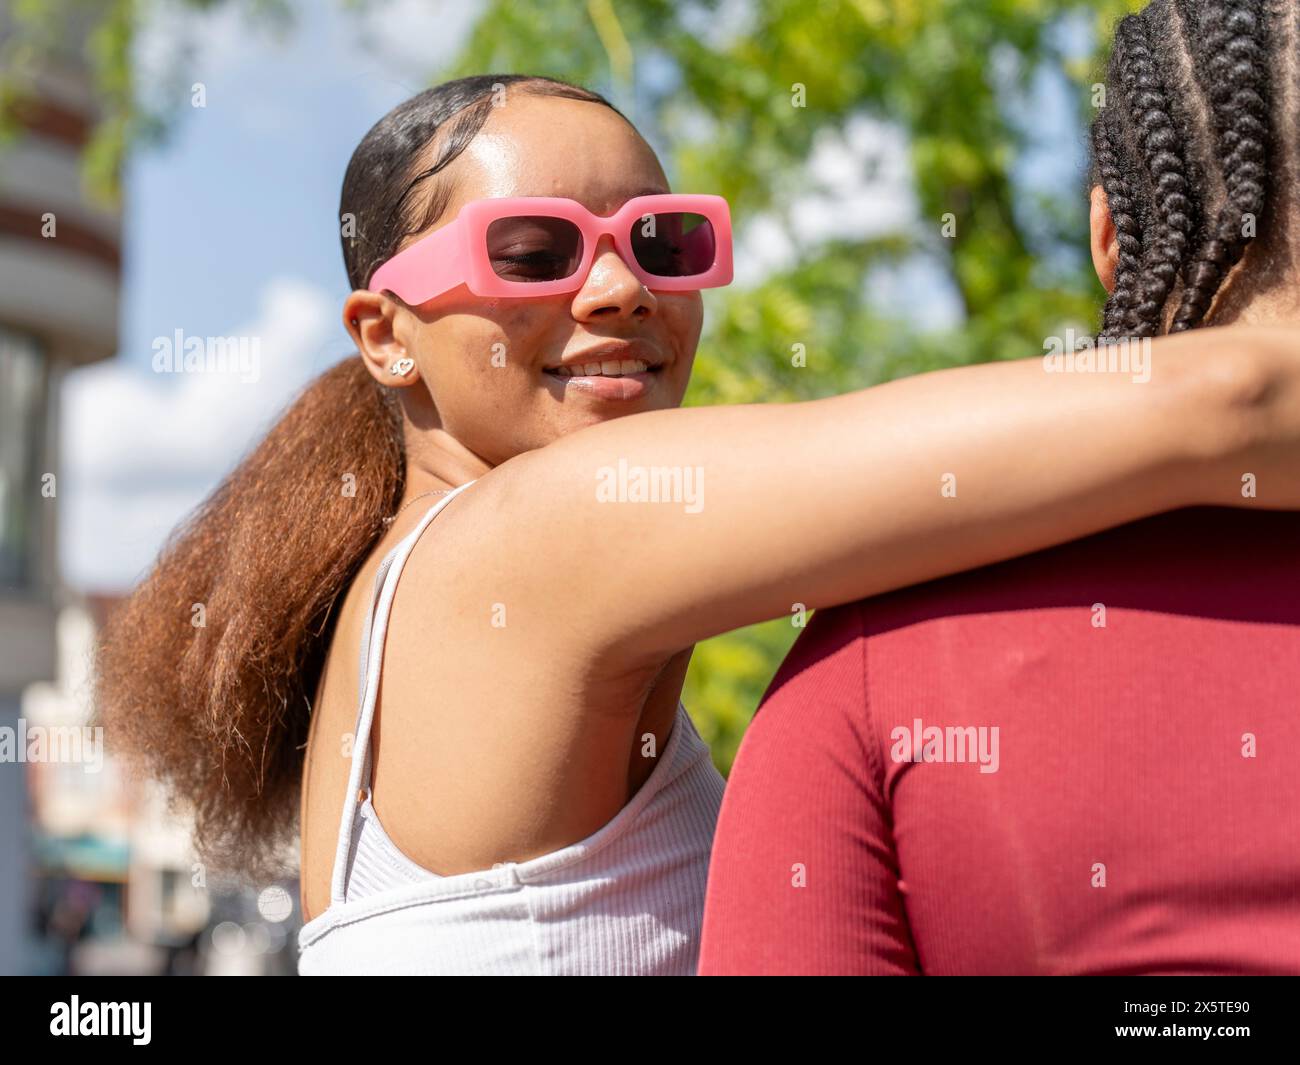 Portrait of smiling woman in sunglasses embracing friend on sunny day Stock Photo